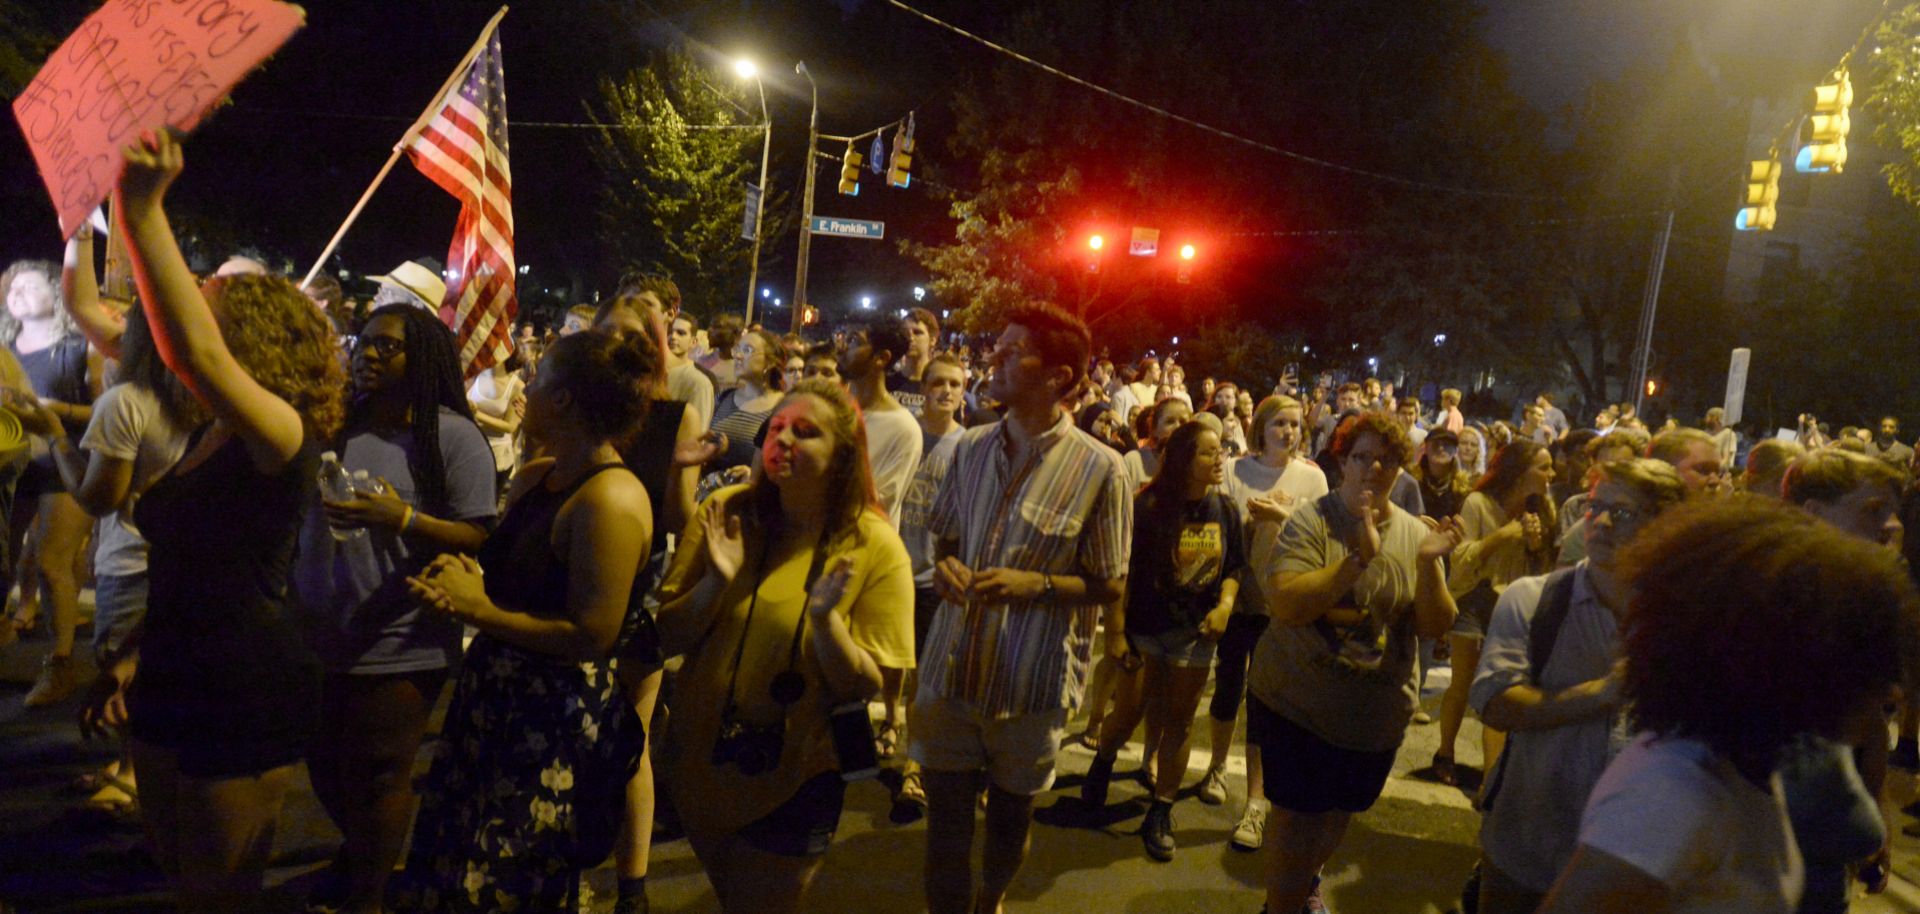 Protesters rally for the removal of a Confederate statue known as Silent Sam from the campus of the University of North Carolina in Chapel Hill on Aug. 22, 2017.